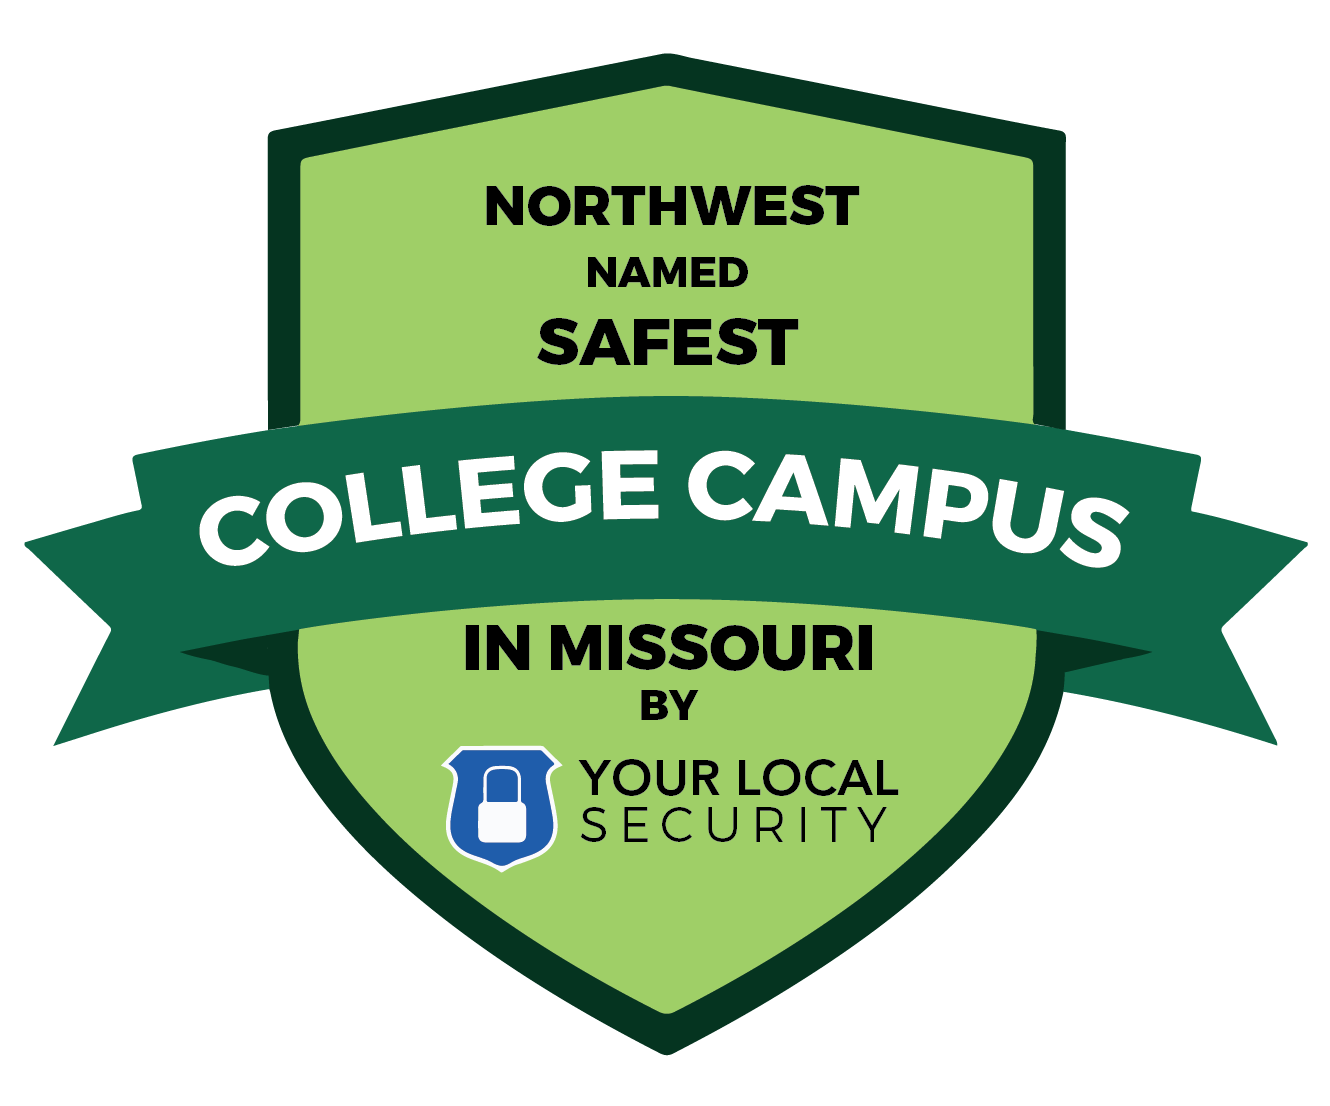 Northwest named "Safest College Campus in Missouri" by Your Campus Security.